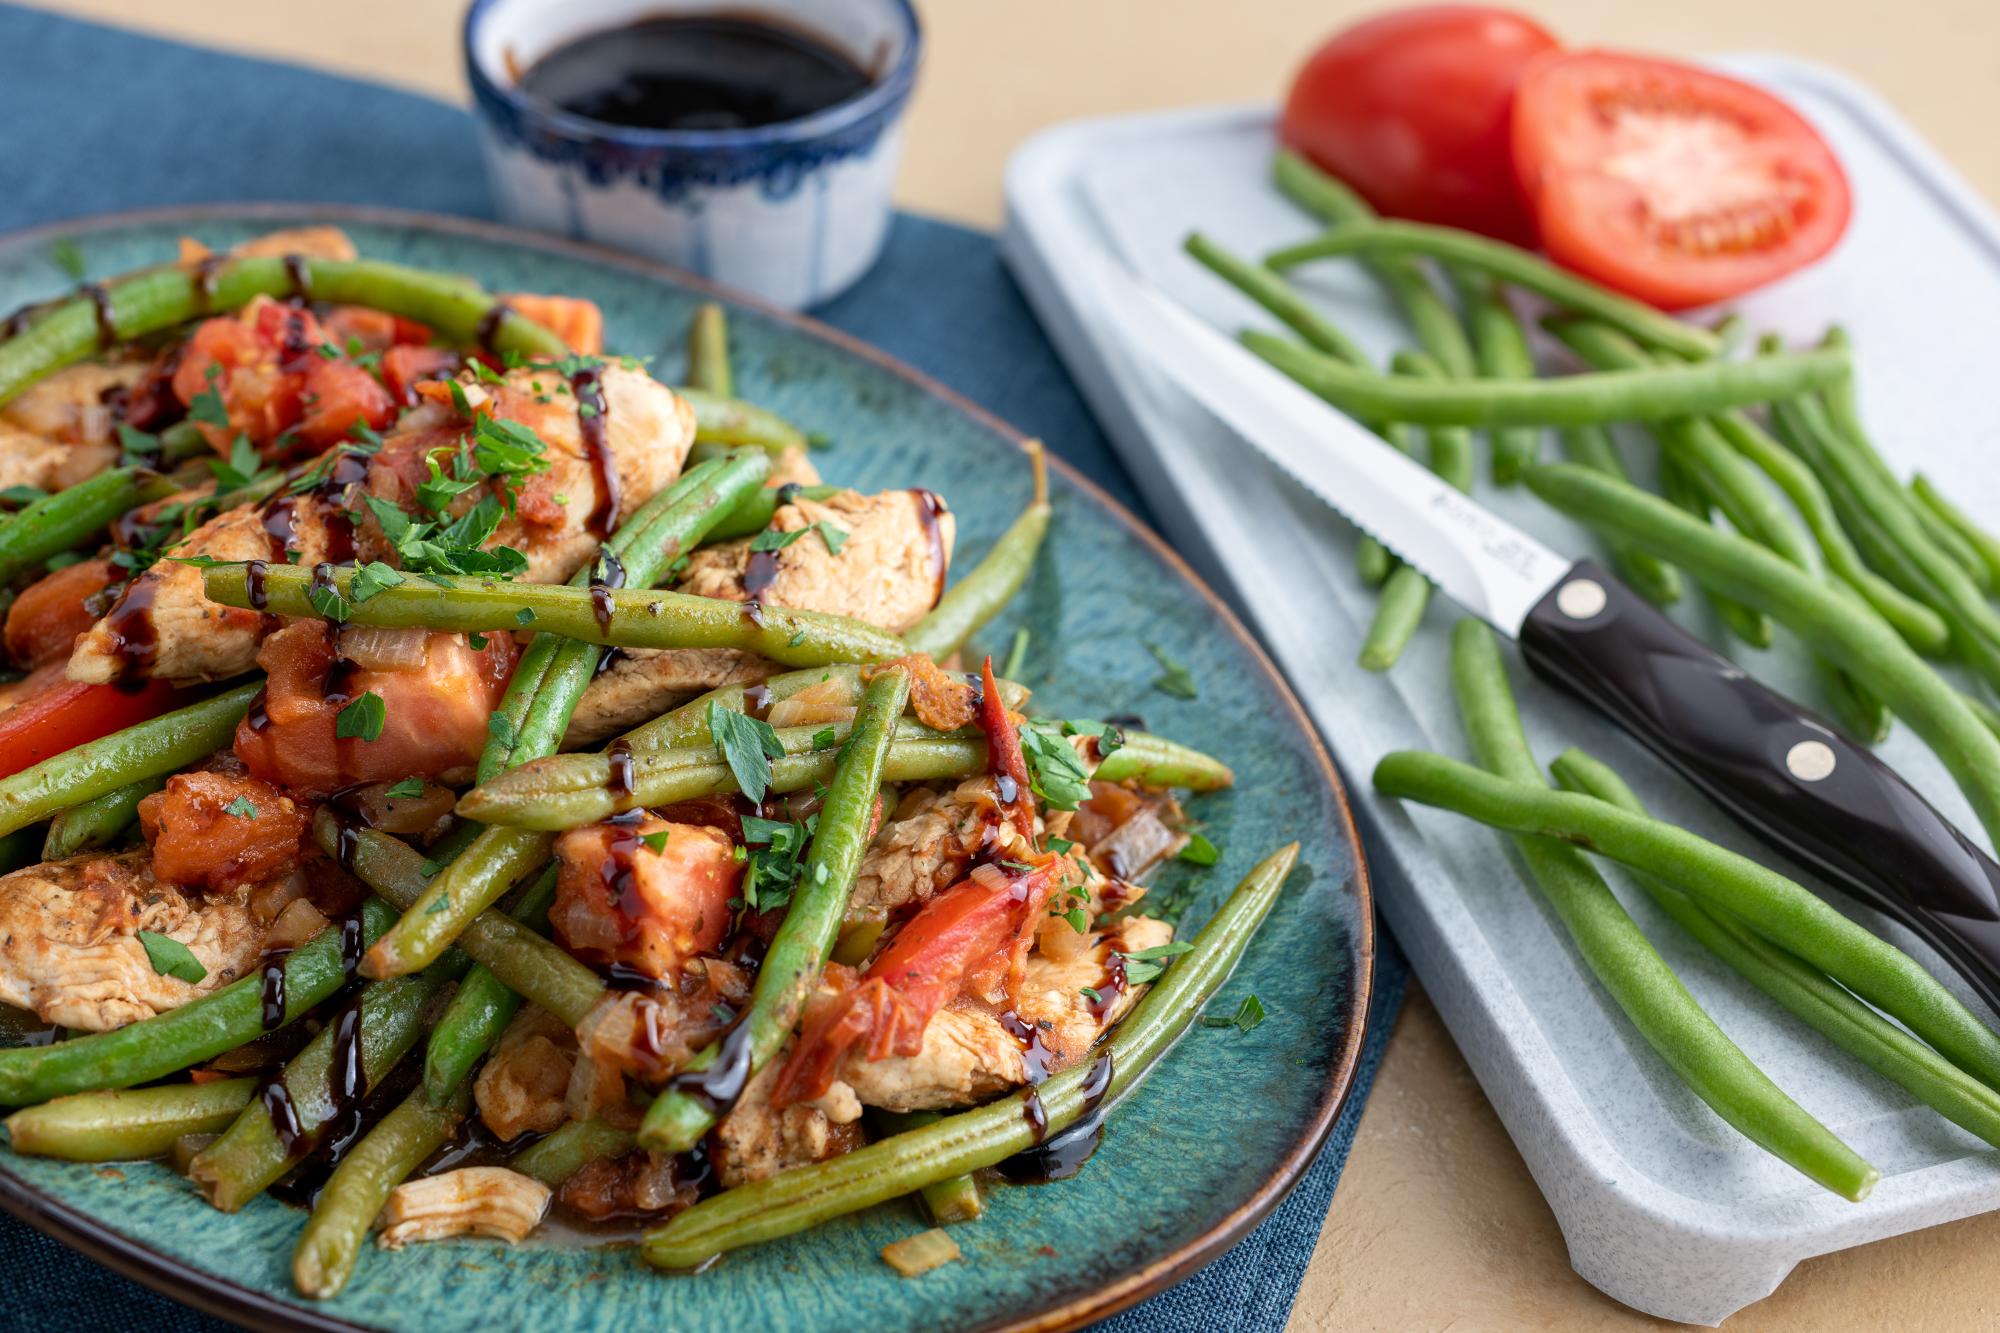 One Skillet Balsamic Chicken With Green Beans and Tomatoes